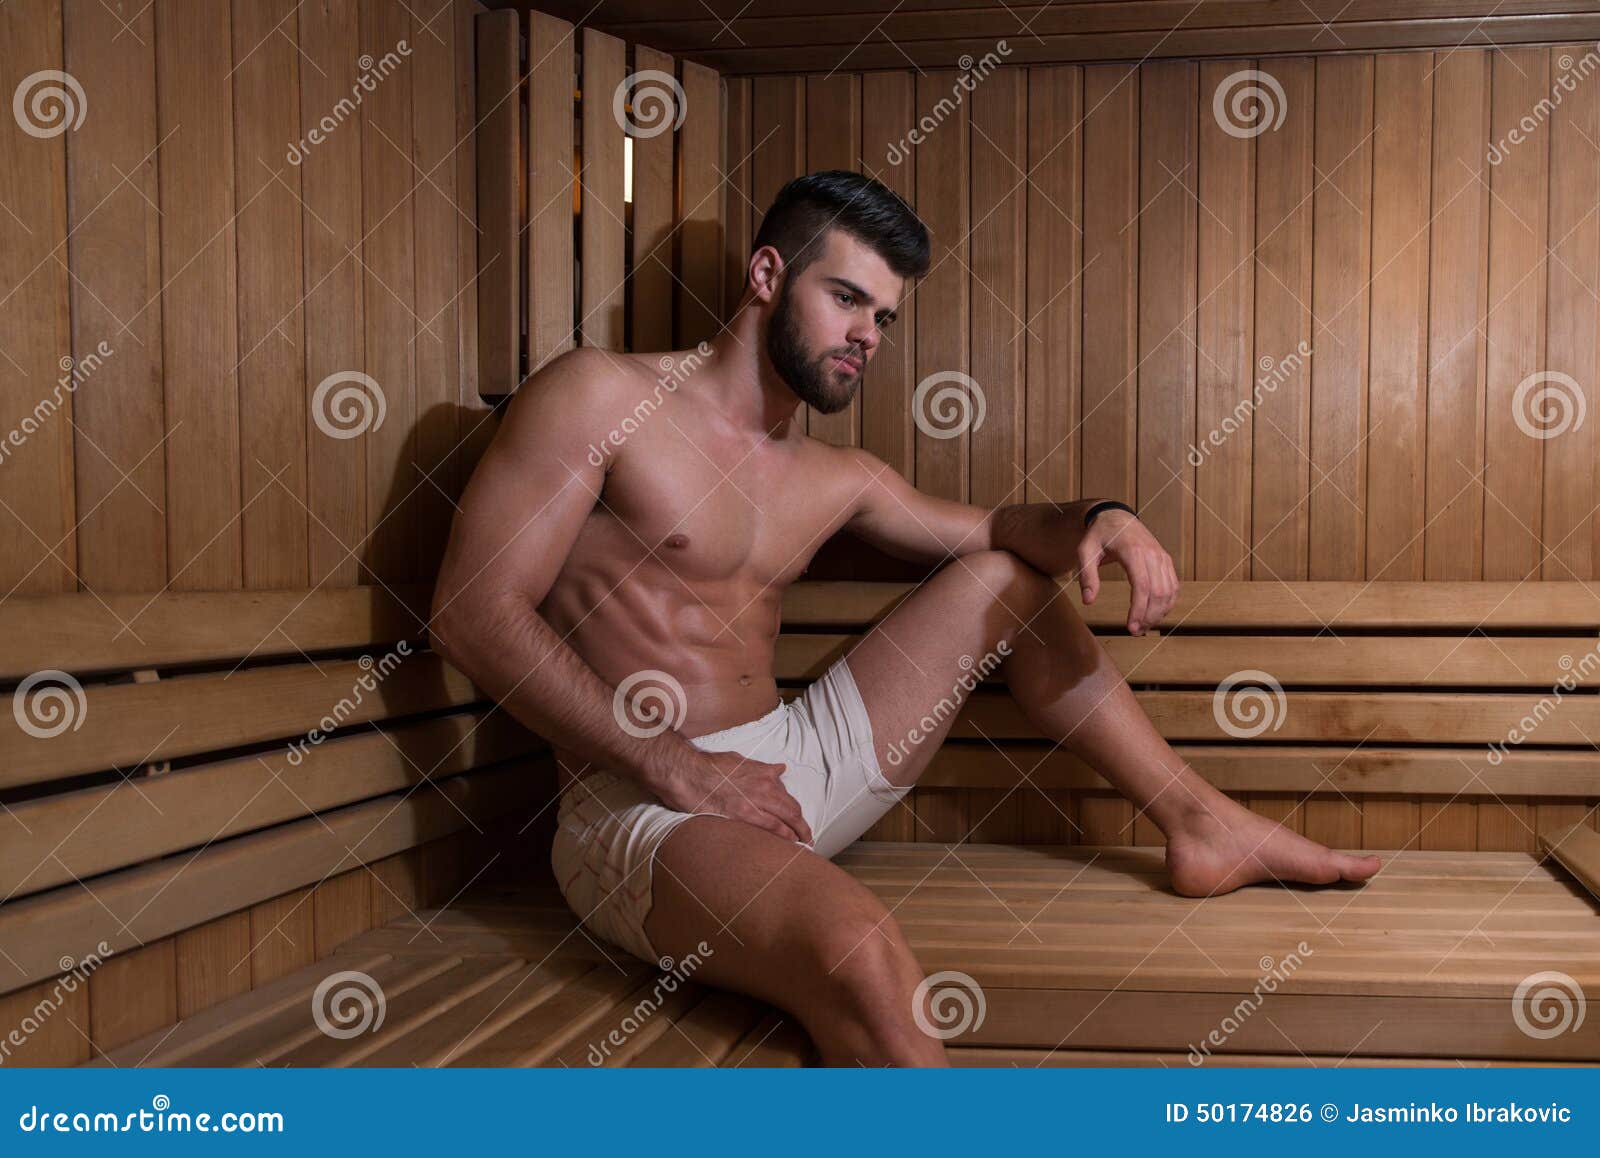 darrell lea recommends cheating in the sauna pic